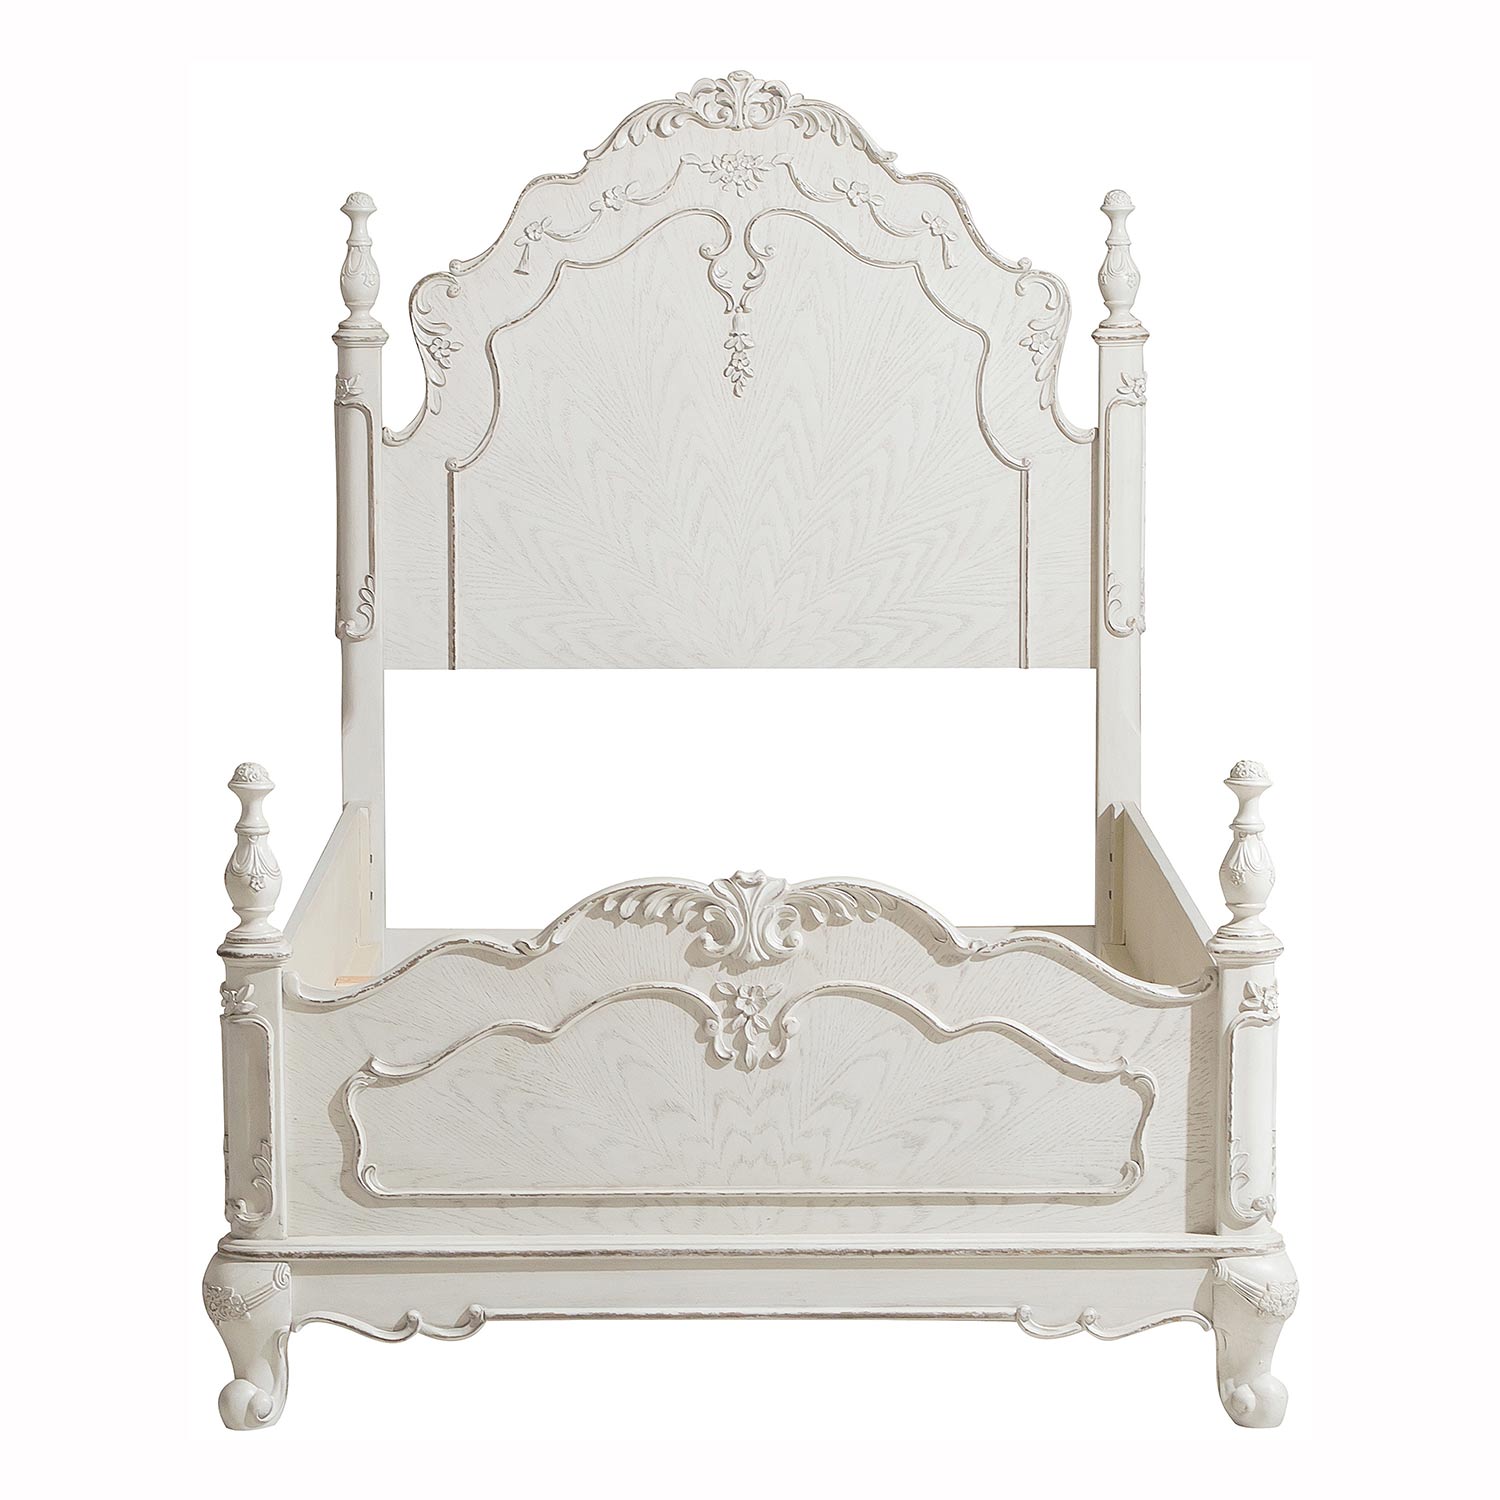 Homelegance Cinderella Bed - Antique White with Gray Rub-Through